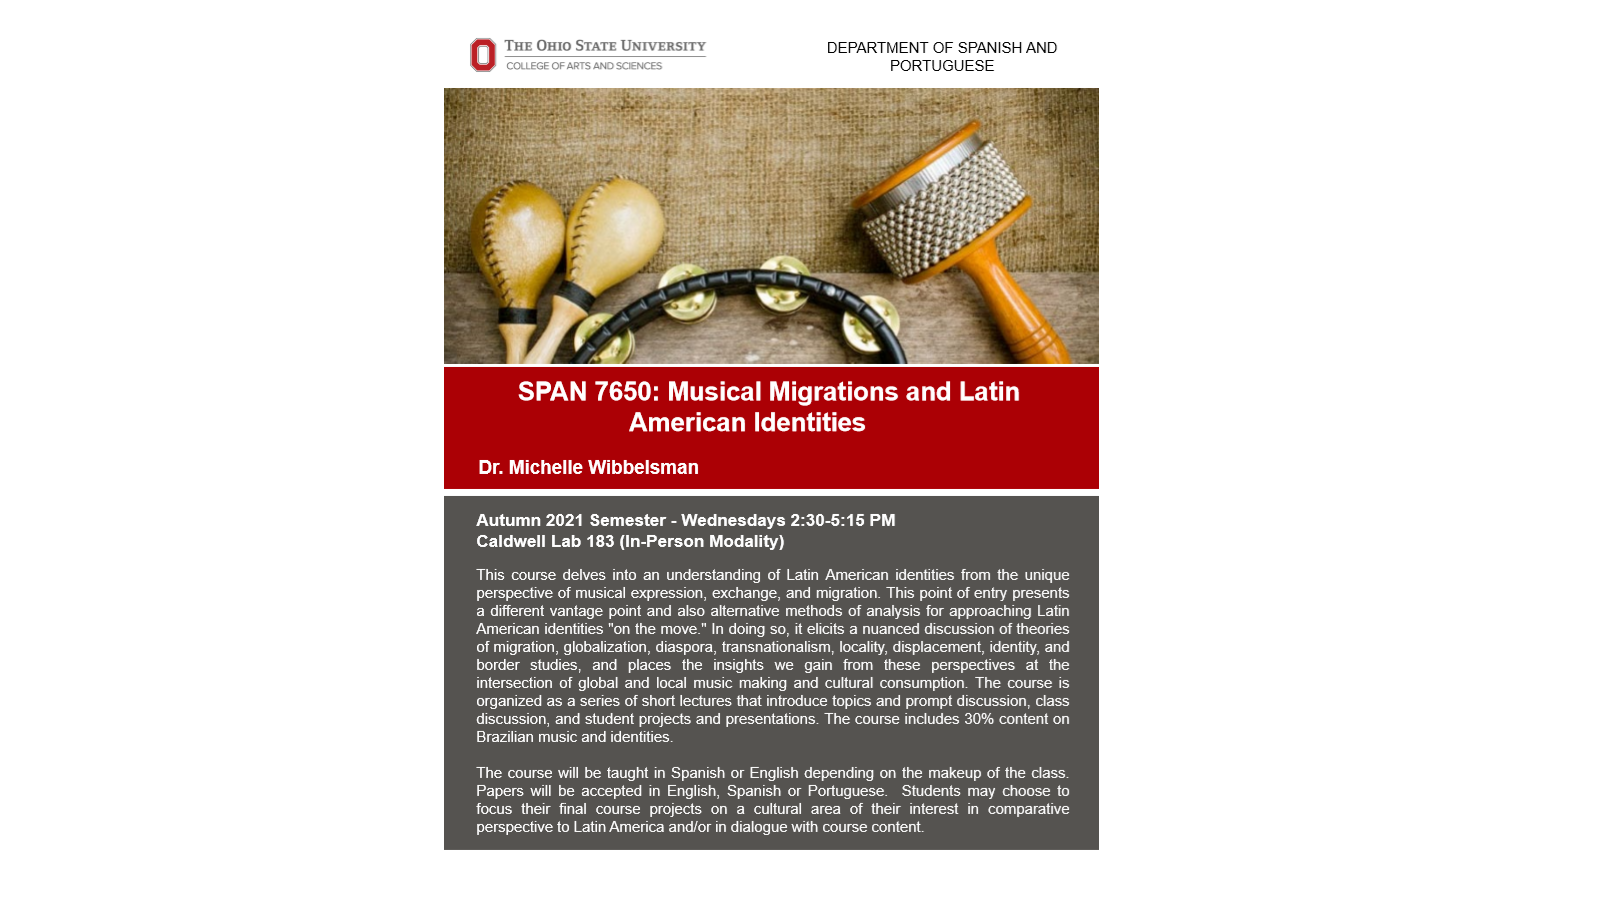 SPAN 7650: Musical Migrations and Latin American Identities